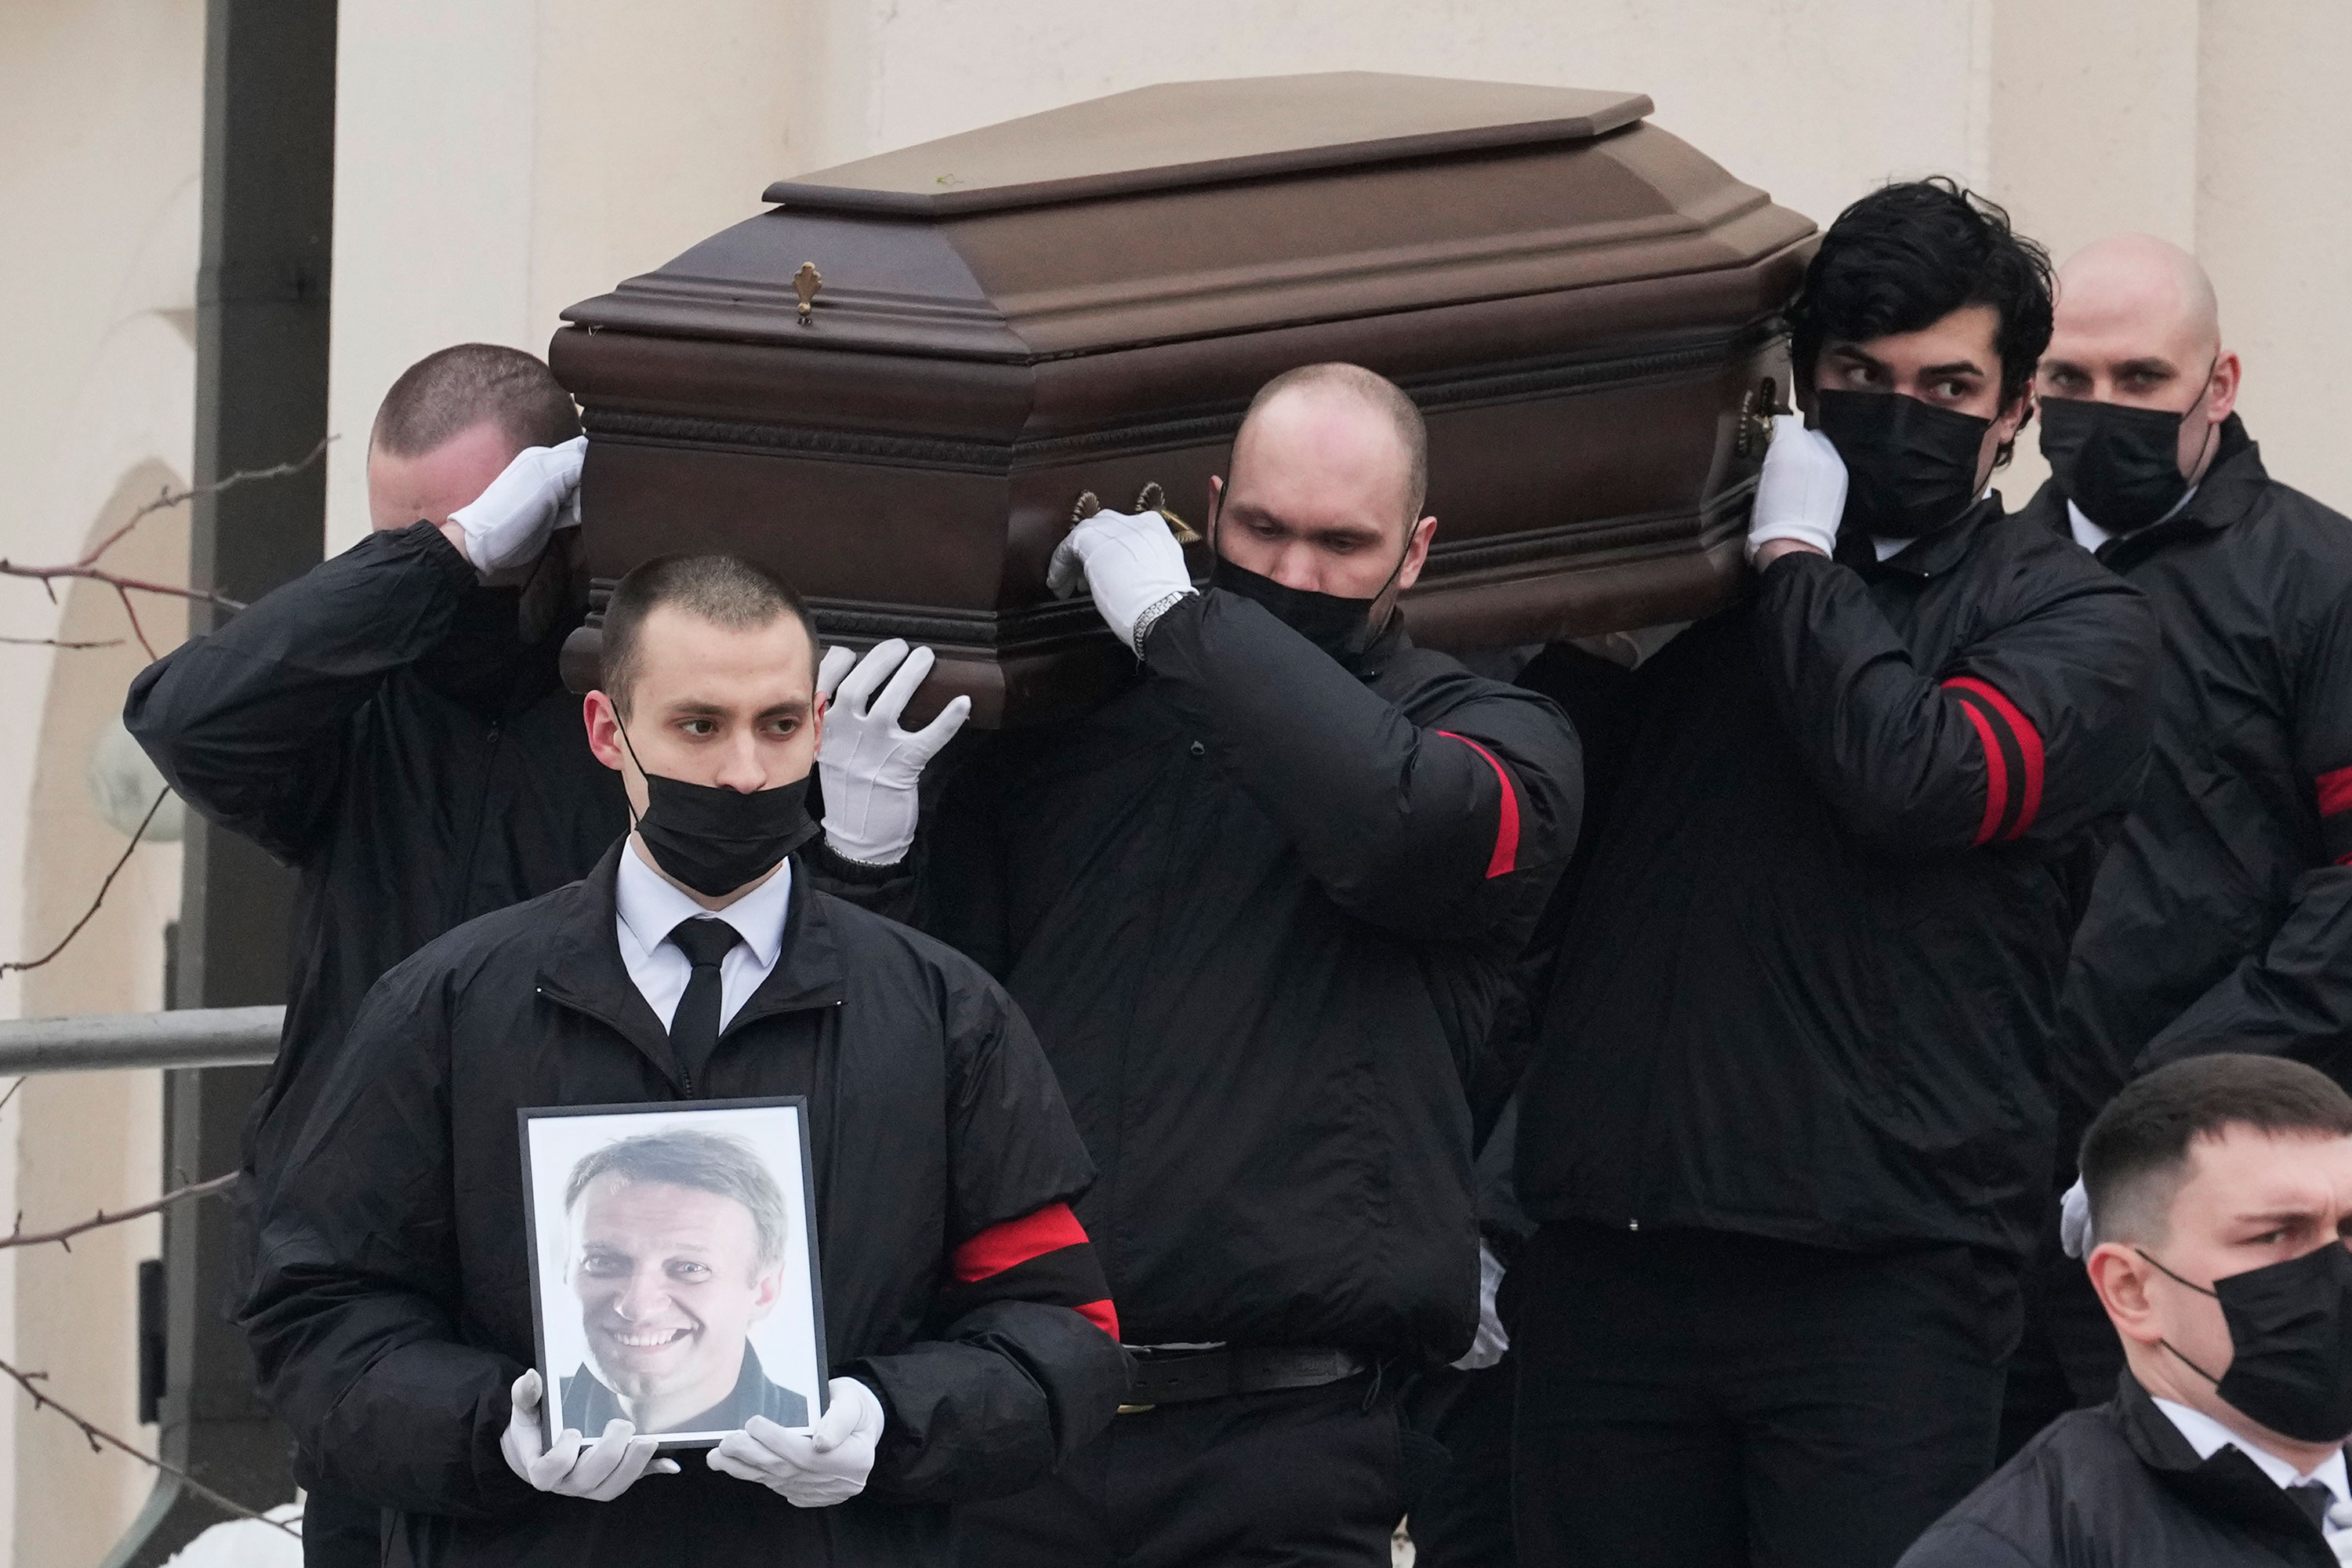 Navalny's coffin is carried out of the church after the funeral.